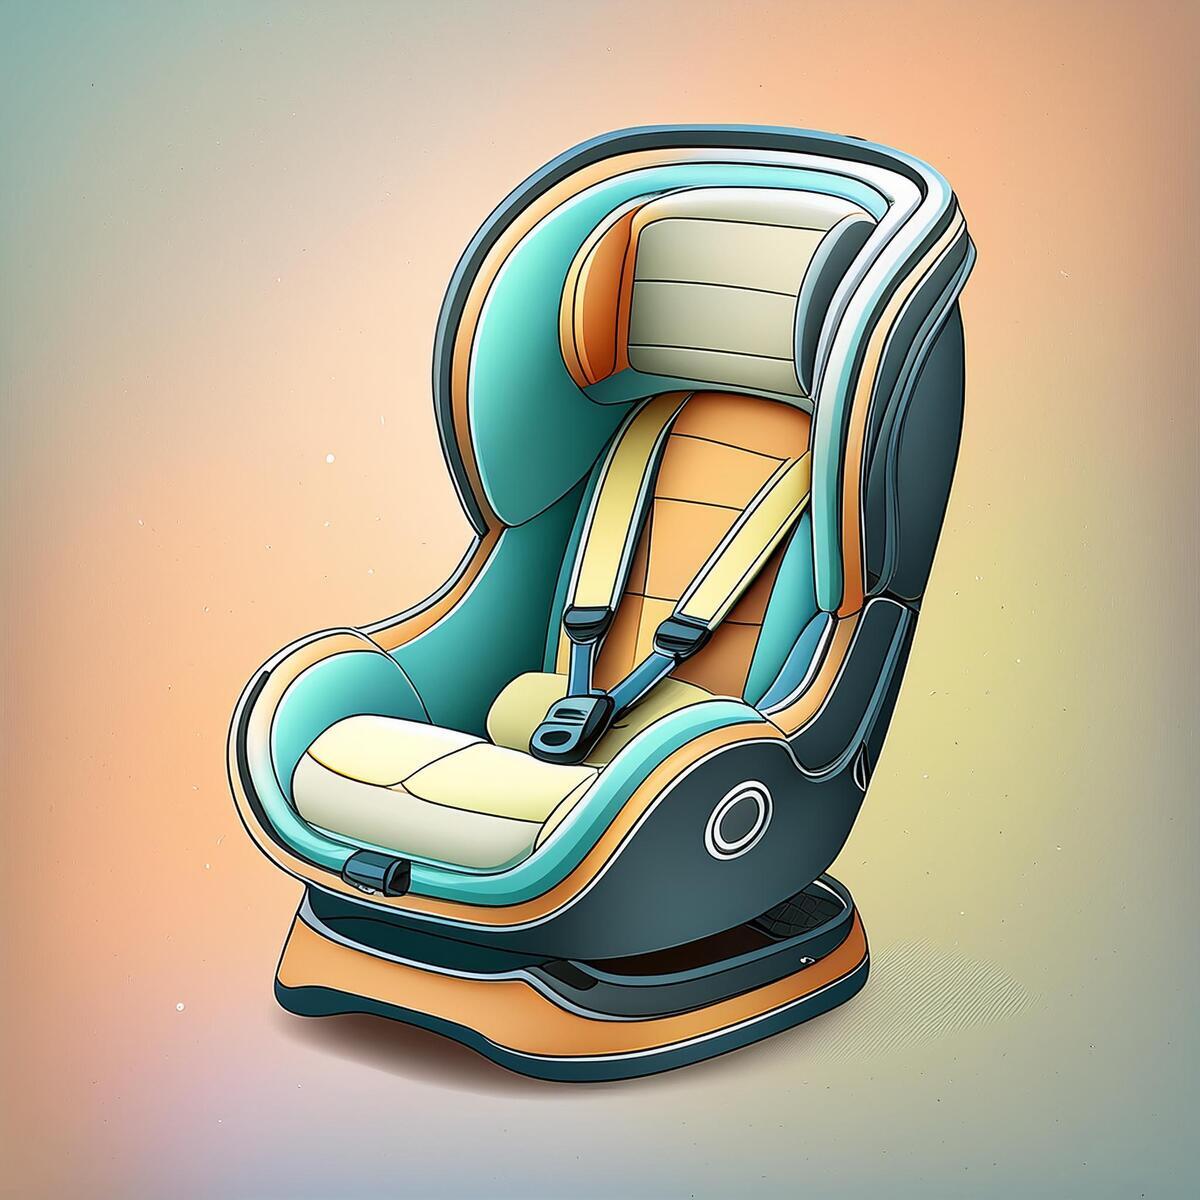 Carseat drawing